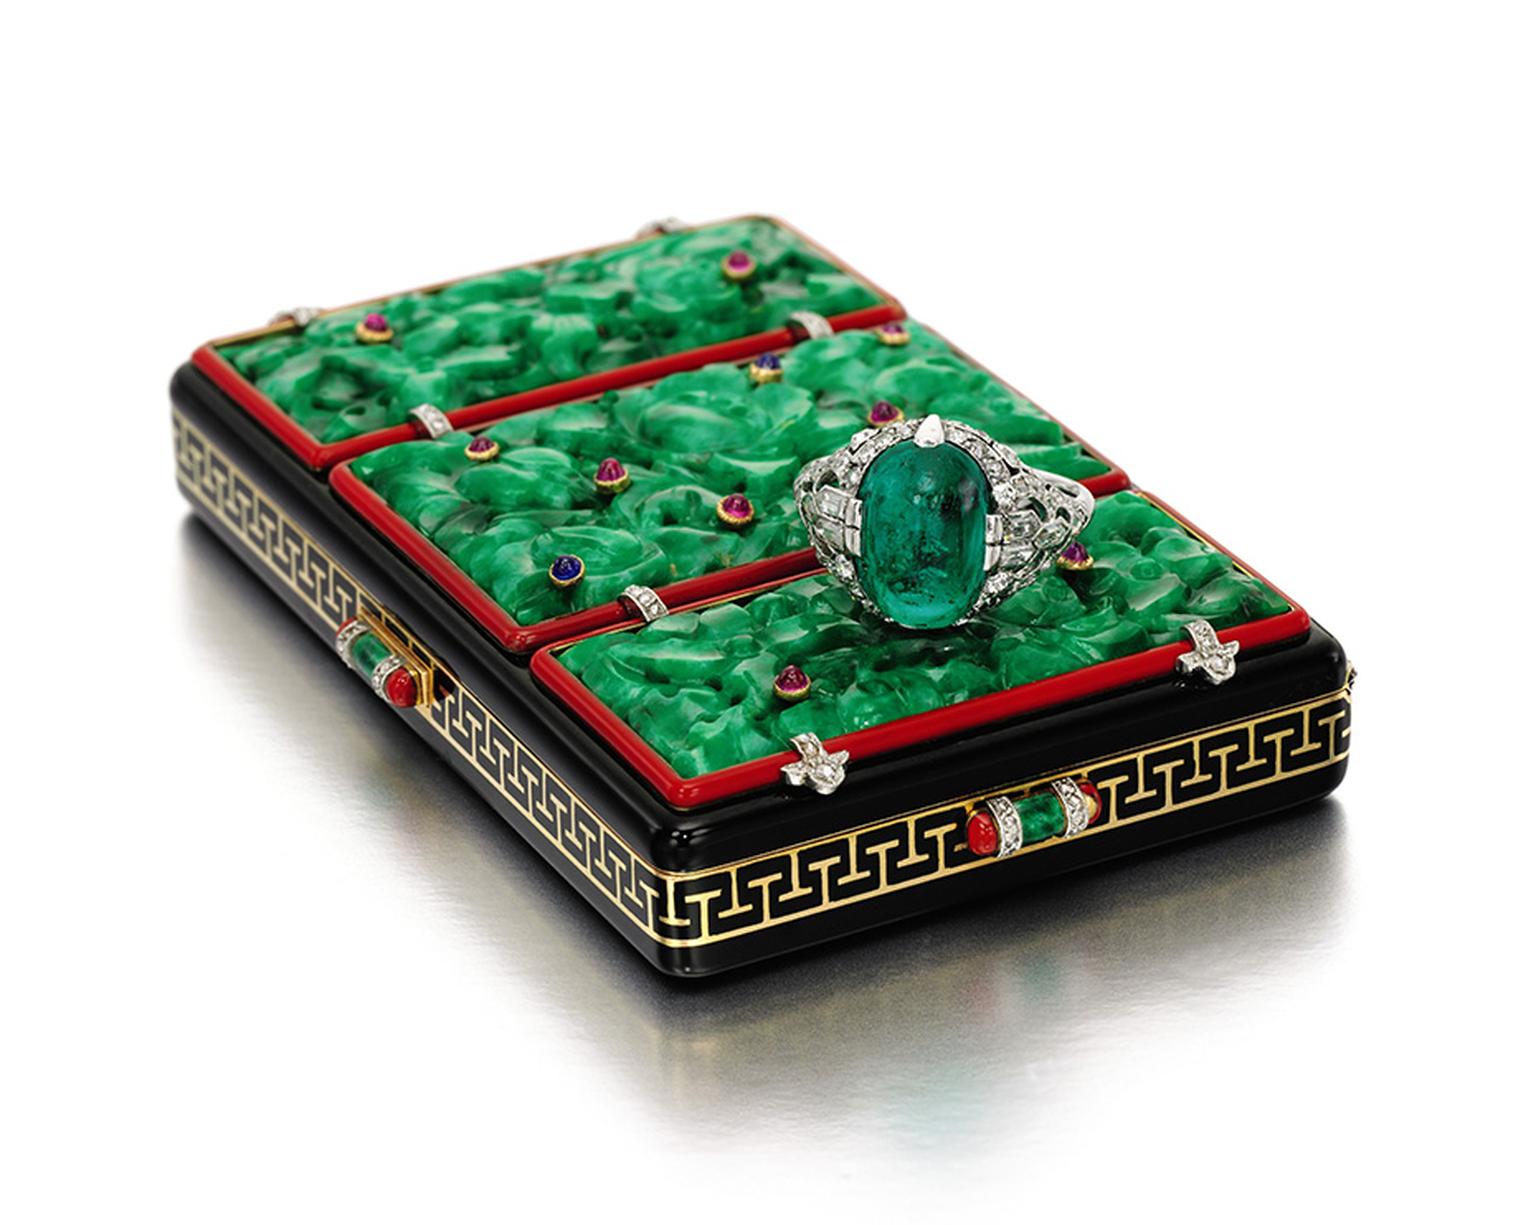 Lot 285, a Lacloche Frères 1920s gem set, enamel and diamond vanity case, set with three carved jadeite plaques inset with cabochon sapphires and rubies(estimate: £8,000-12,000; sold for £68,500), and lot 287, an emerald and diamond ring by Van Cleef & Ar